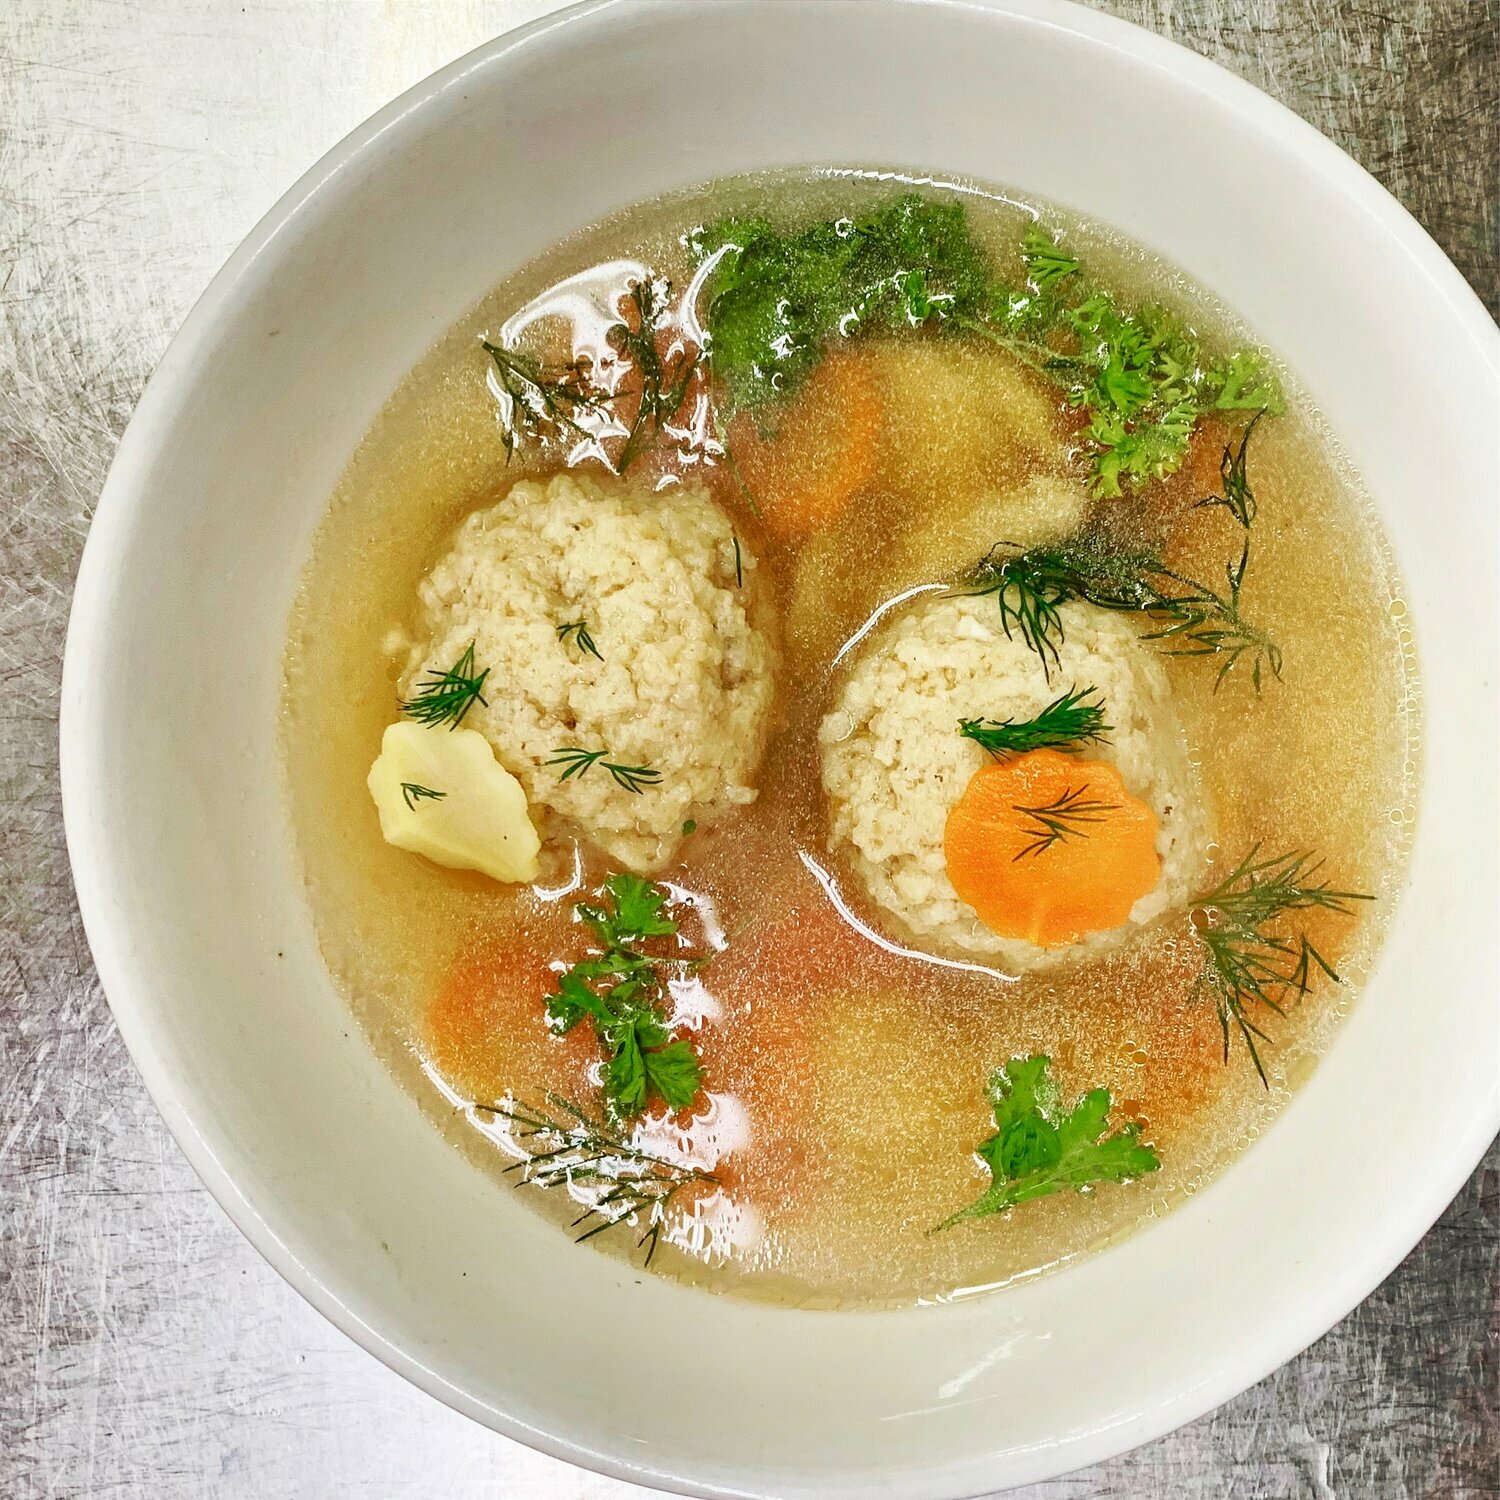 L & W Market's matzo ball soup is on the menu for Rosh Hashanah. COURTESY L&W MARKET